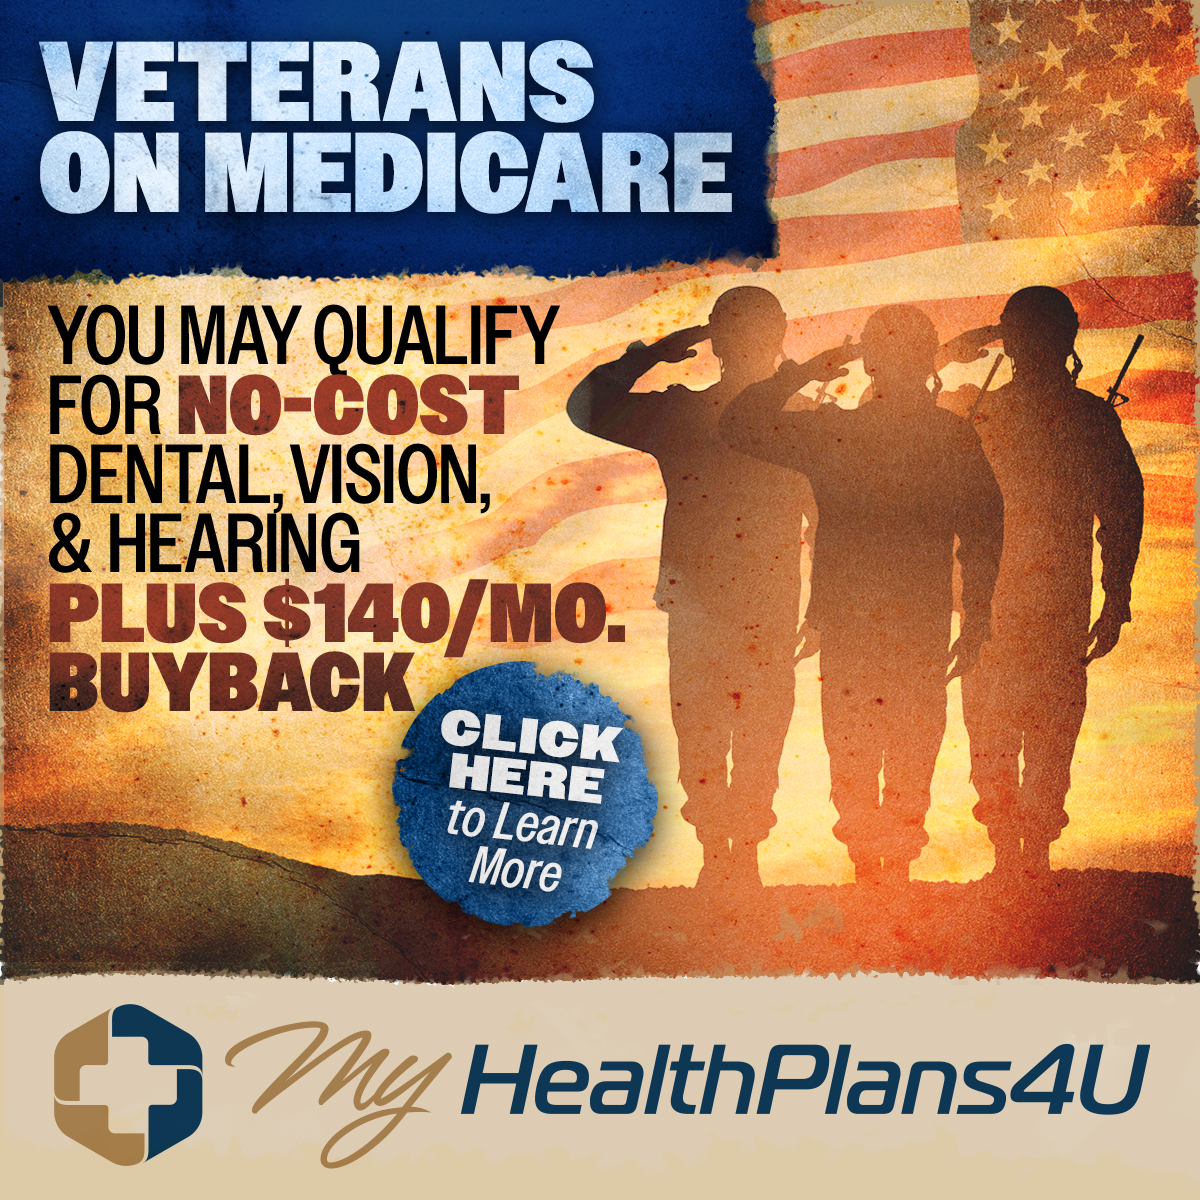 Military Veteran? 65+ on Medicare? You may qualify for no-cost dental, vision & hearing plus $140 per month buy back. Click here to learn more. My Health Plans 4 U.